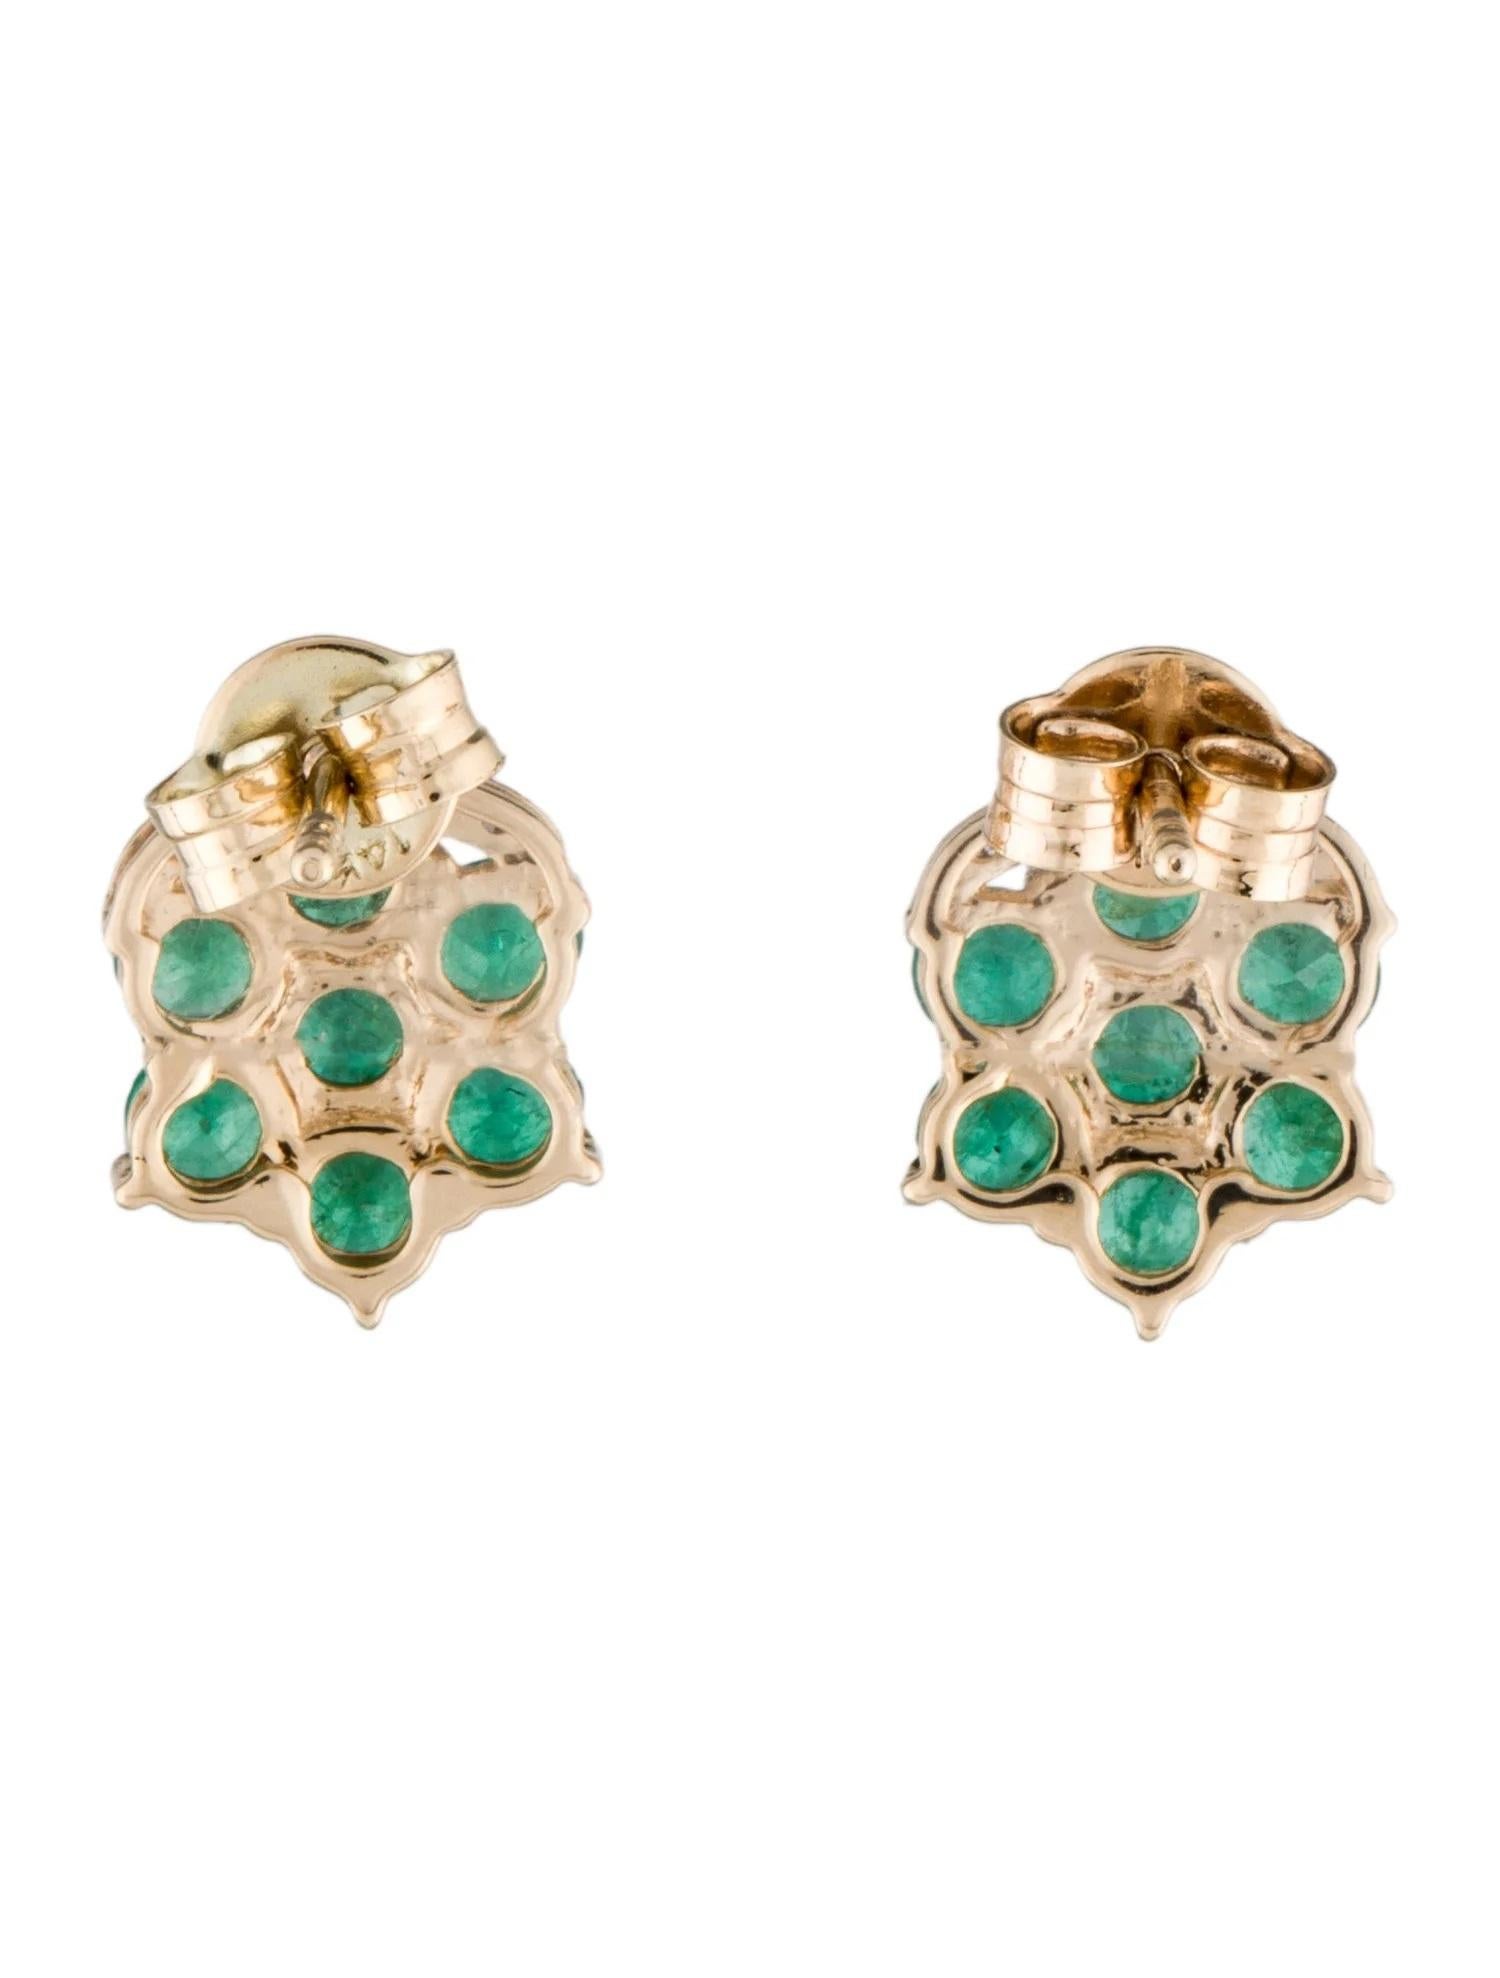 Artist Stylish 14K Yellow Gold Emerald and Diamond Earrings For Sale